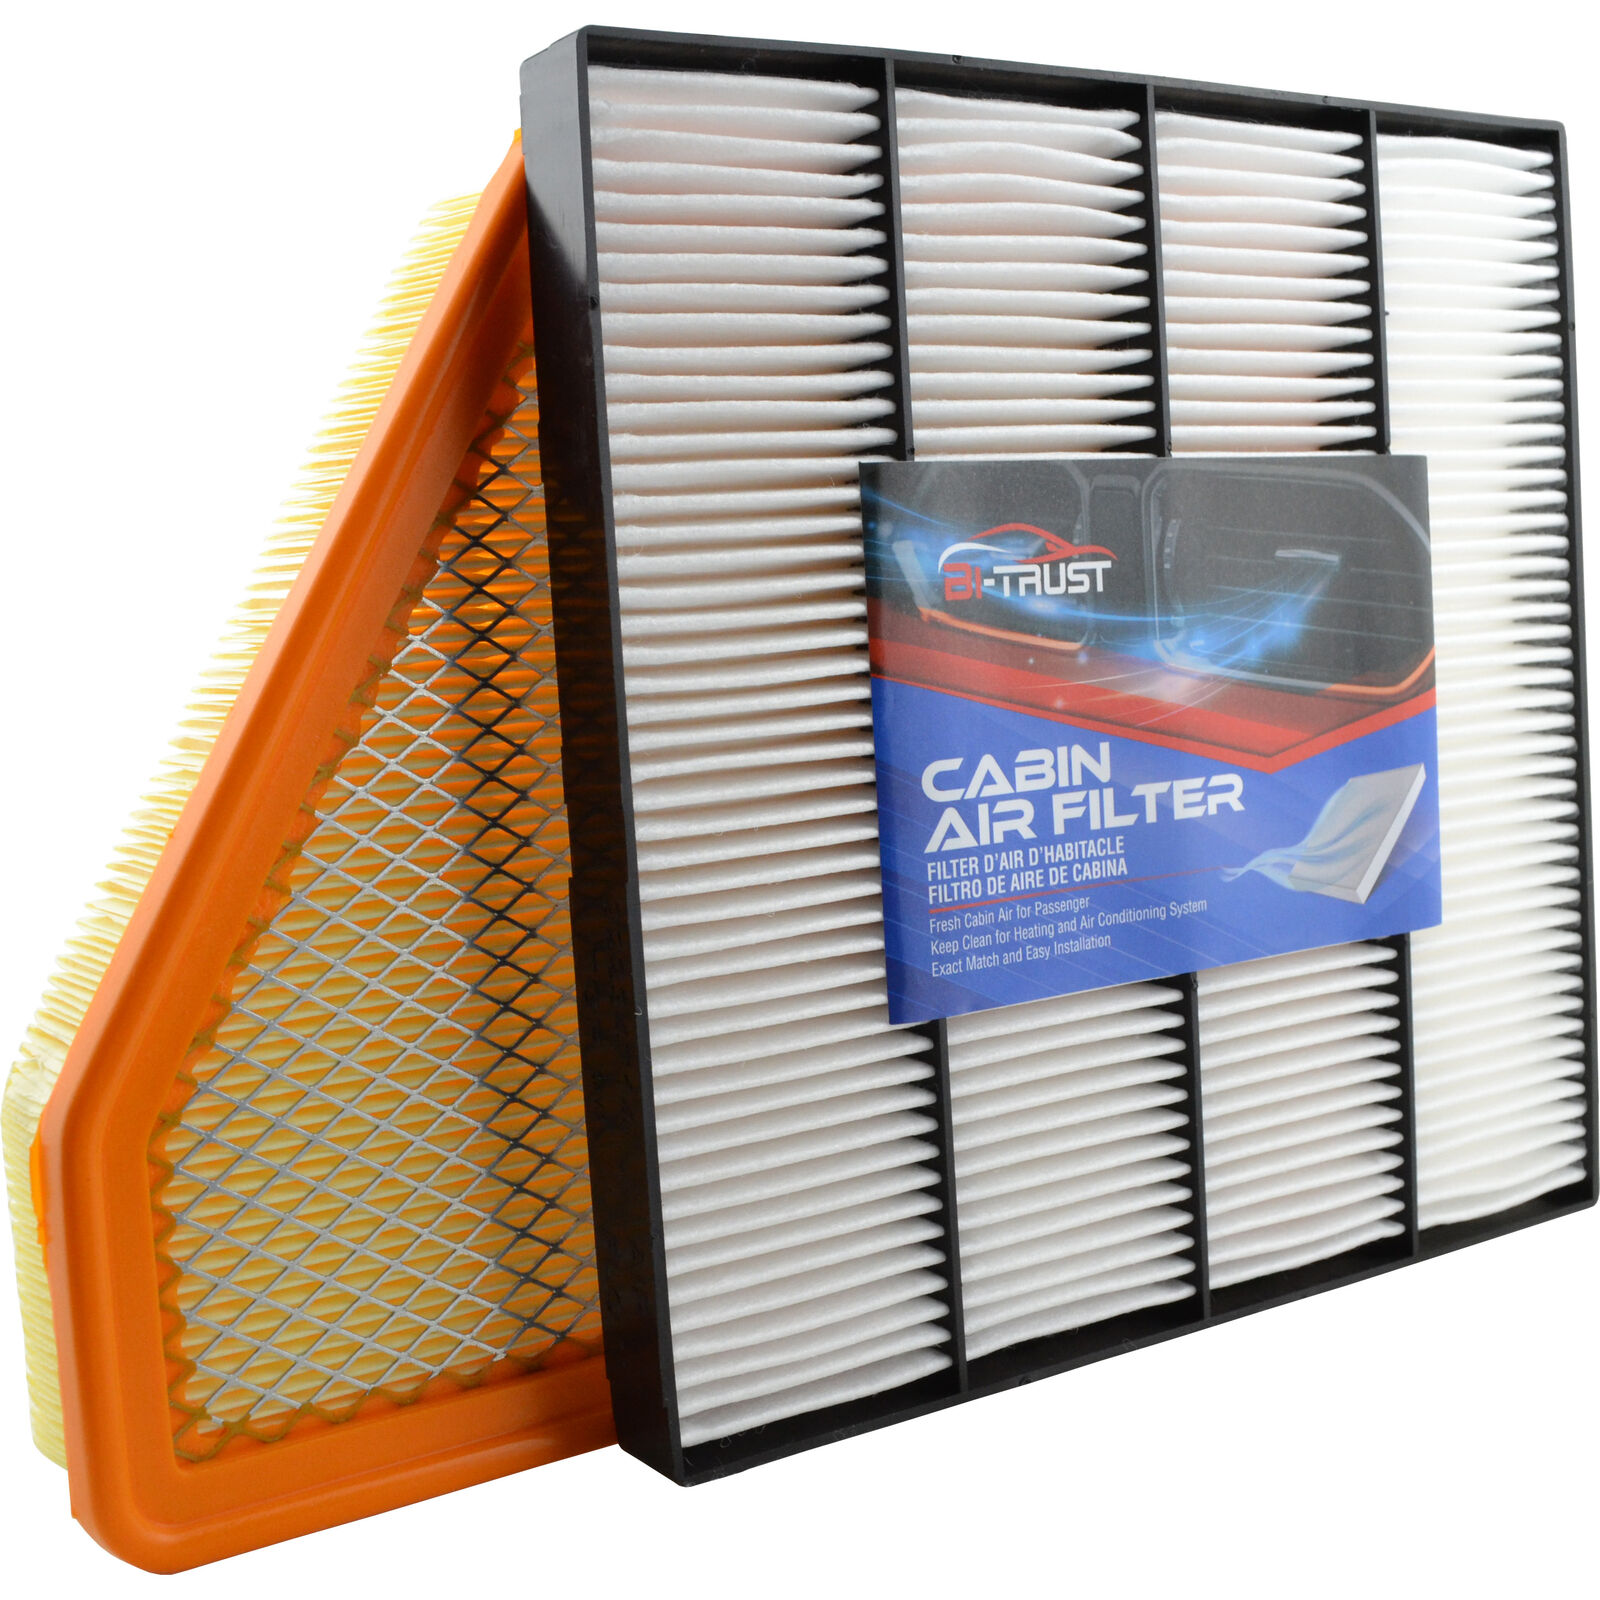 Engine & Cabin Air Filter Combo Set for Chevrolet Chevy Camaro 2010-2015